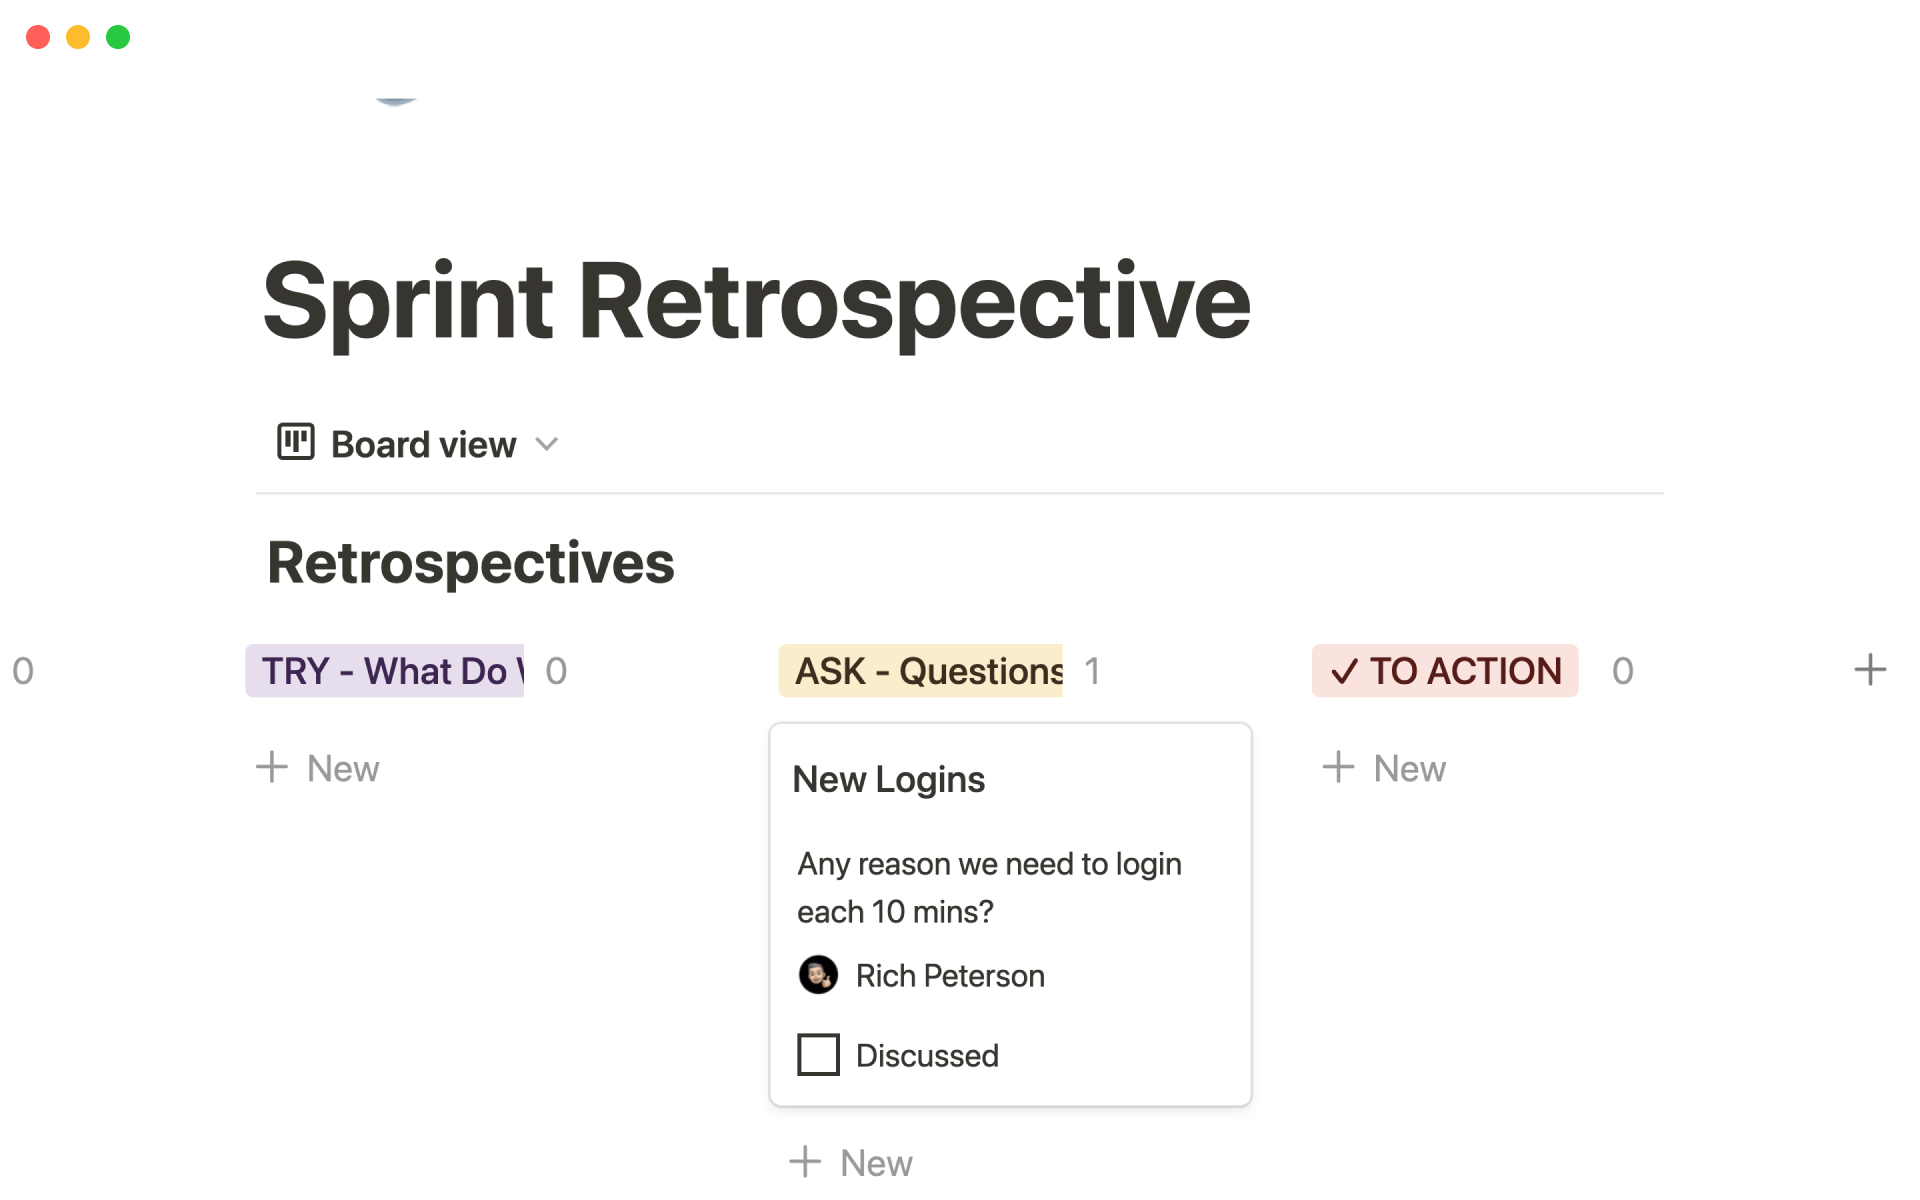 Track discussion topics, feedback, and actionable to-do’s so agile teams can continuously improve their work—without reinventing the wheel in this Sprint Retro template.